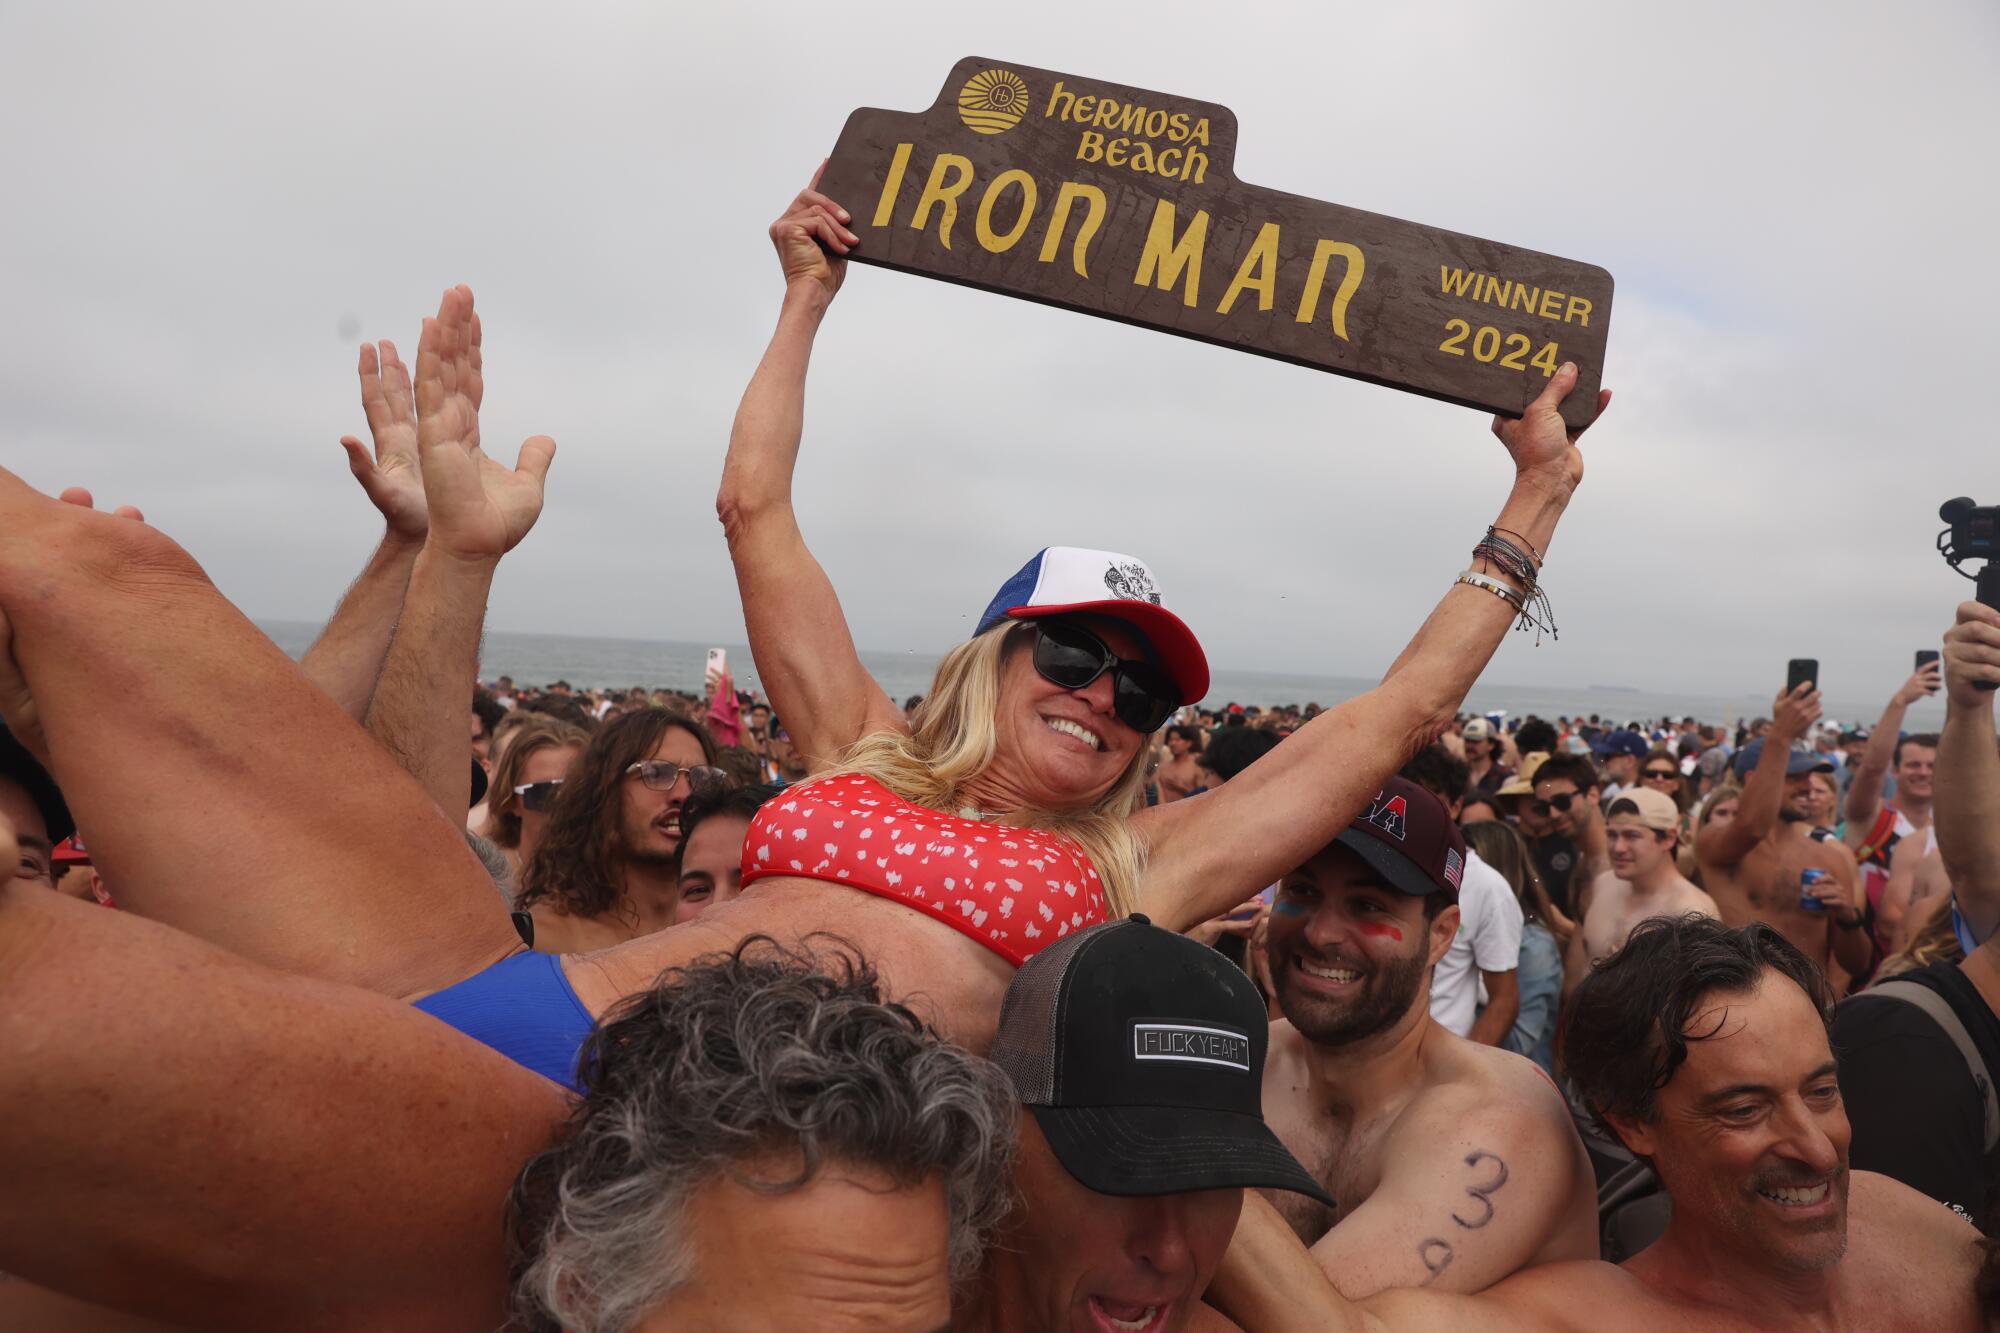 A woman holds a sign that says "Iron Man" while many people lift it in the air.